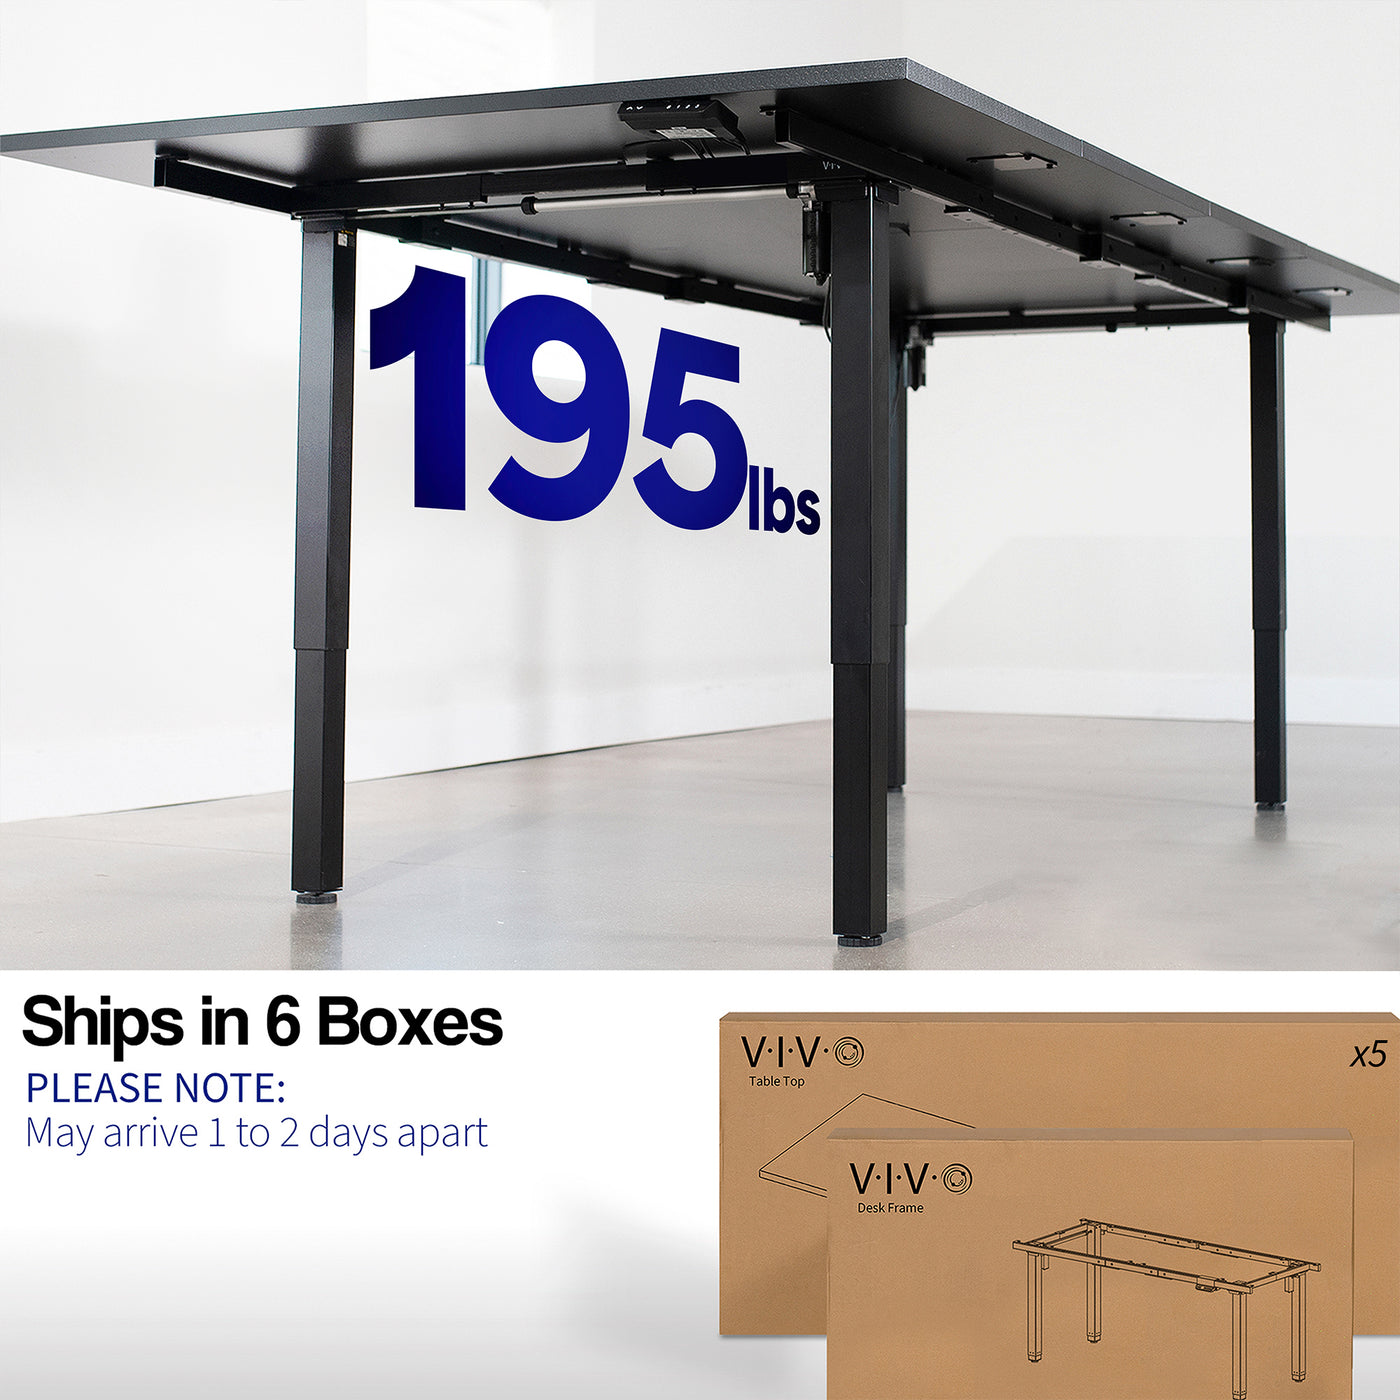 118" x 55" Dual Motor Electric 4-Leg Desk with Square Corner Top is an extra large height adjustable desk perfect for a conference room table or project workstation setup.